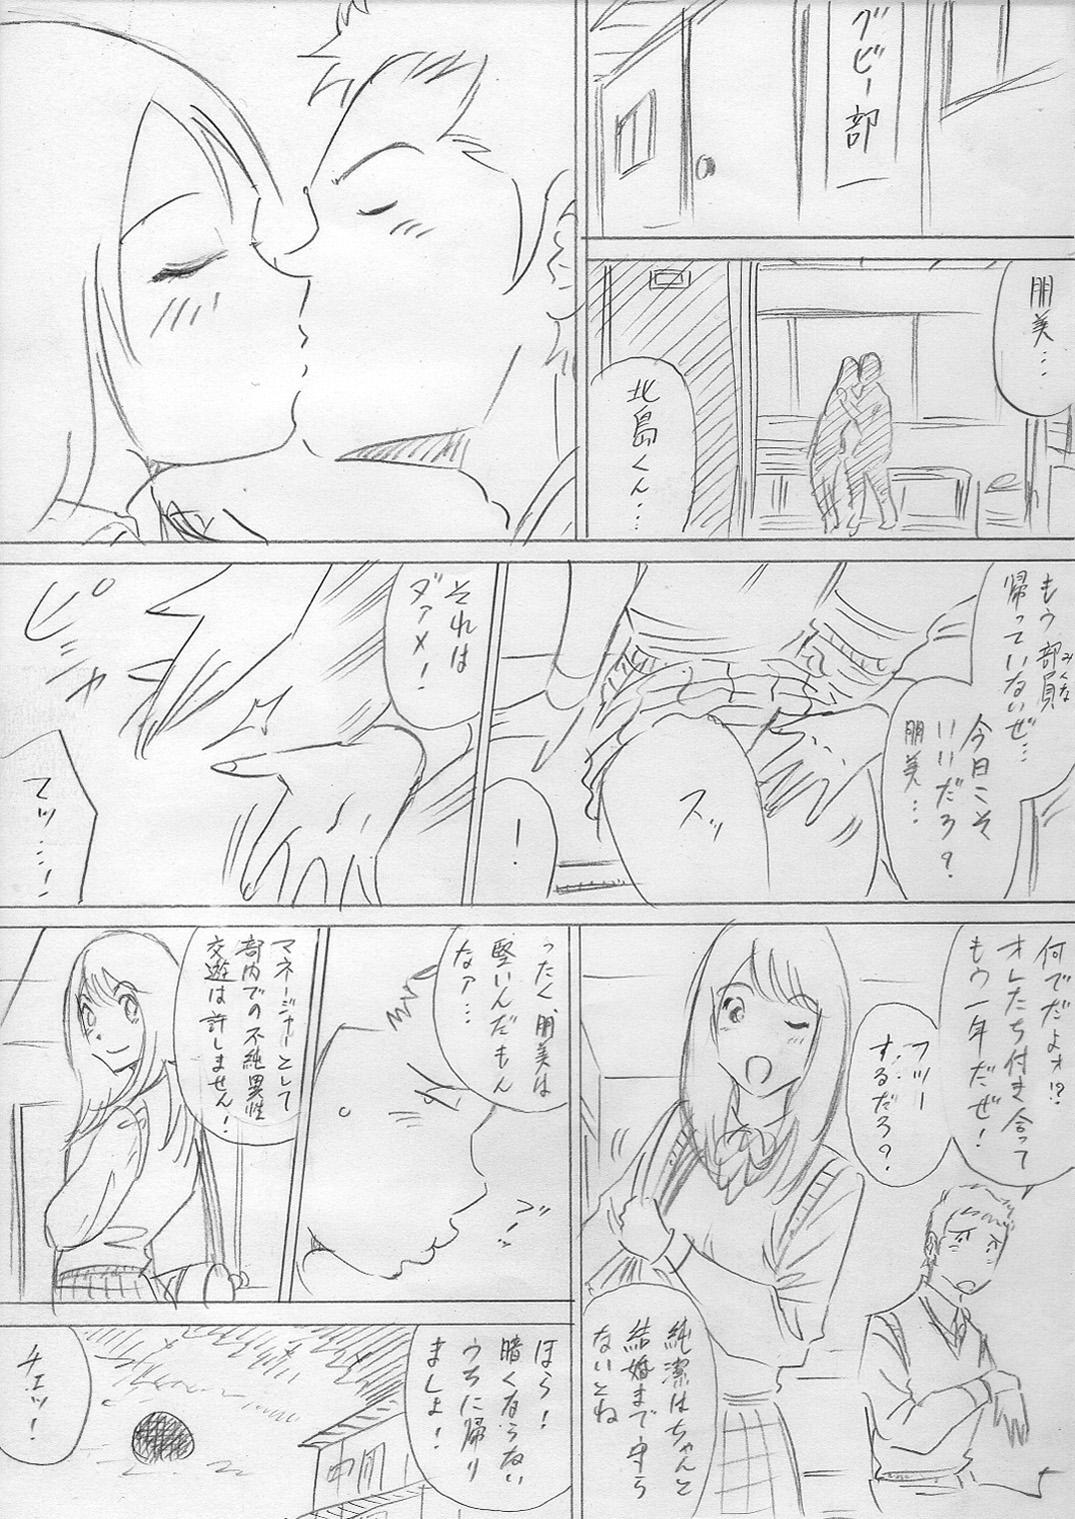 She 堕ちていく日（前編） Porn - Page 5